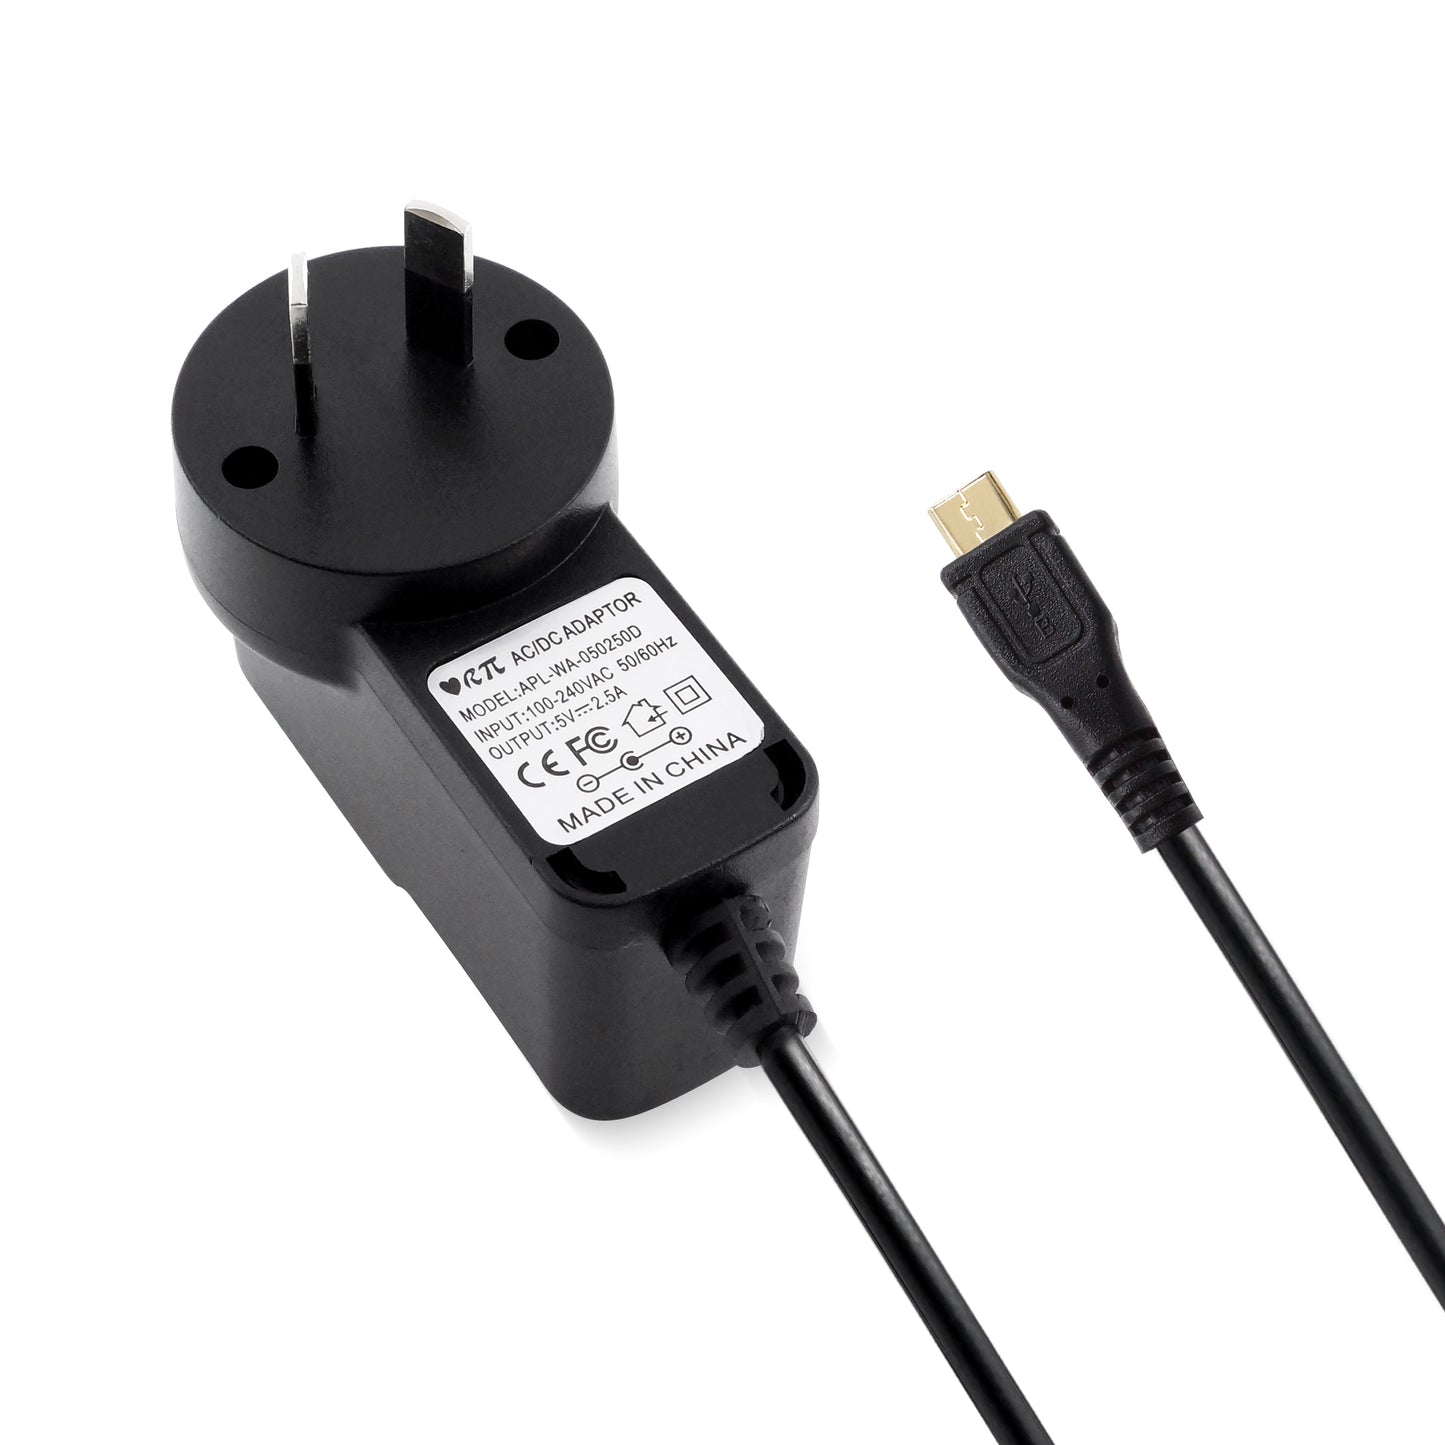 LoveRPi 5V 2.5A MicroUSB Power Supply with LED Indicator